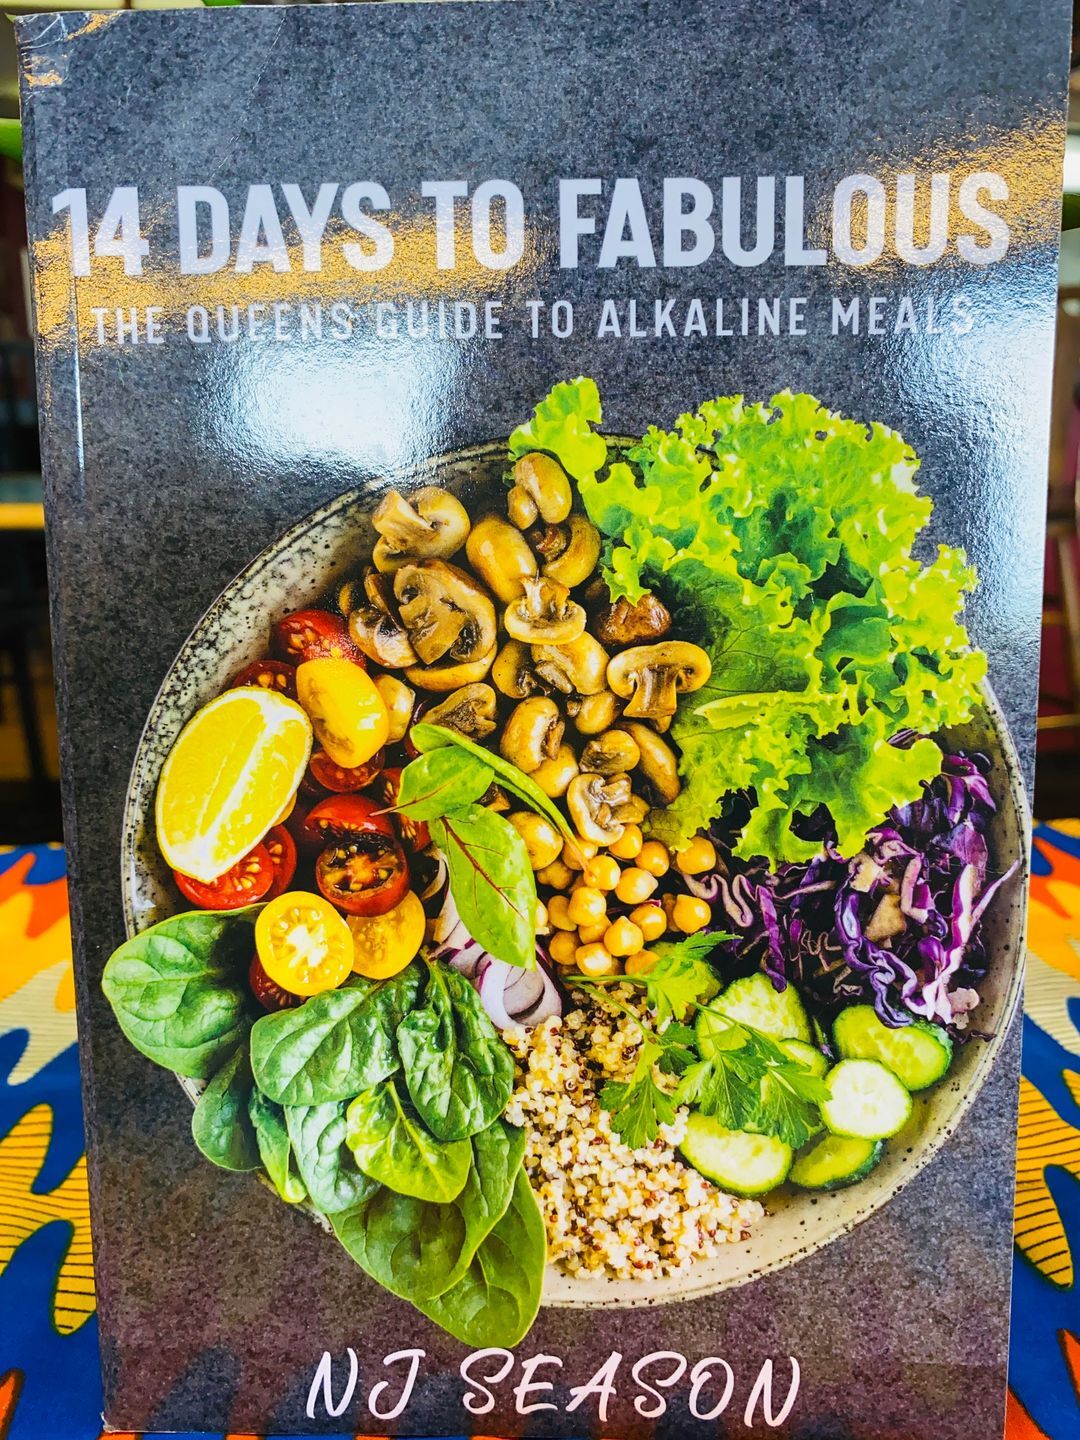 14 days to fabulous Alkaline Recipe Book available on Amazon.com